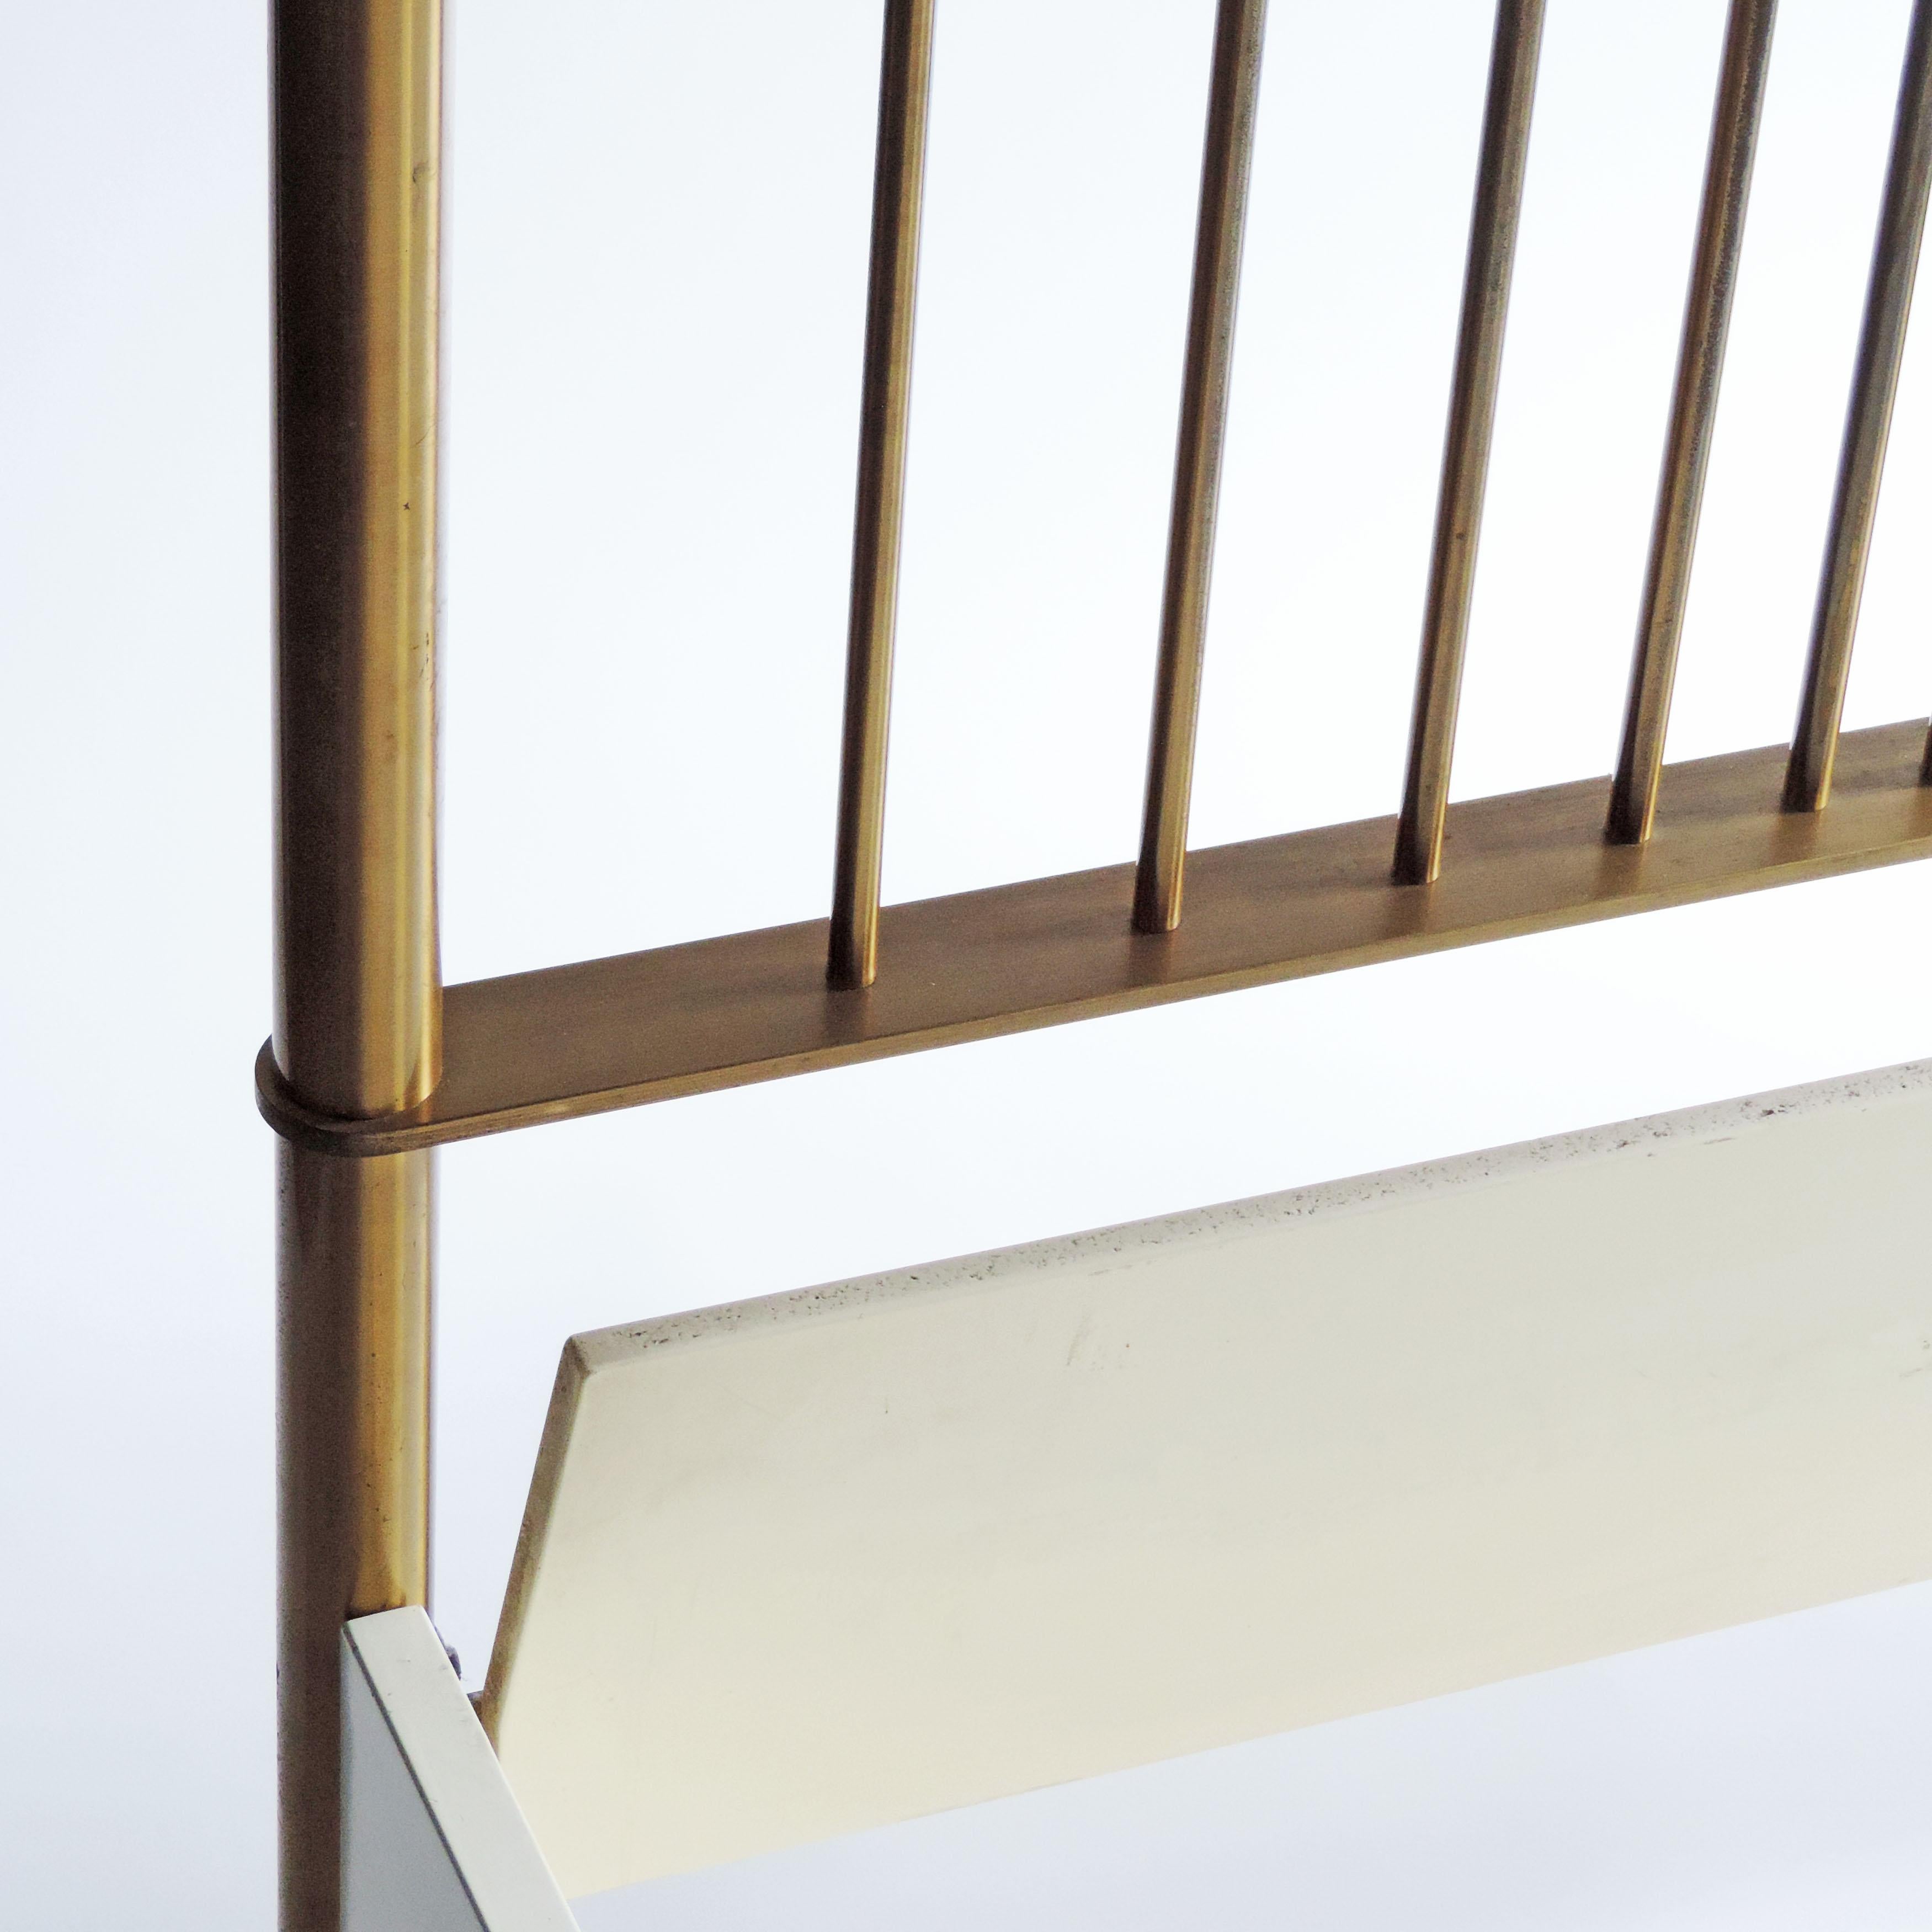 Lacquered Franco Albini & Franca Helg 'Mirage' Brass Double Bed for Frigerio, Italy, 1970s For Sale